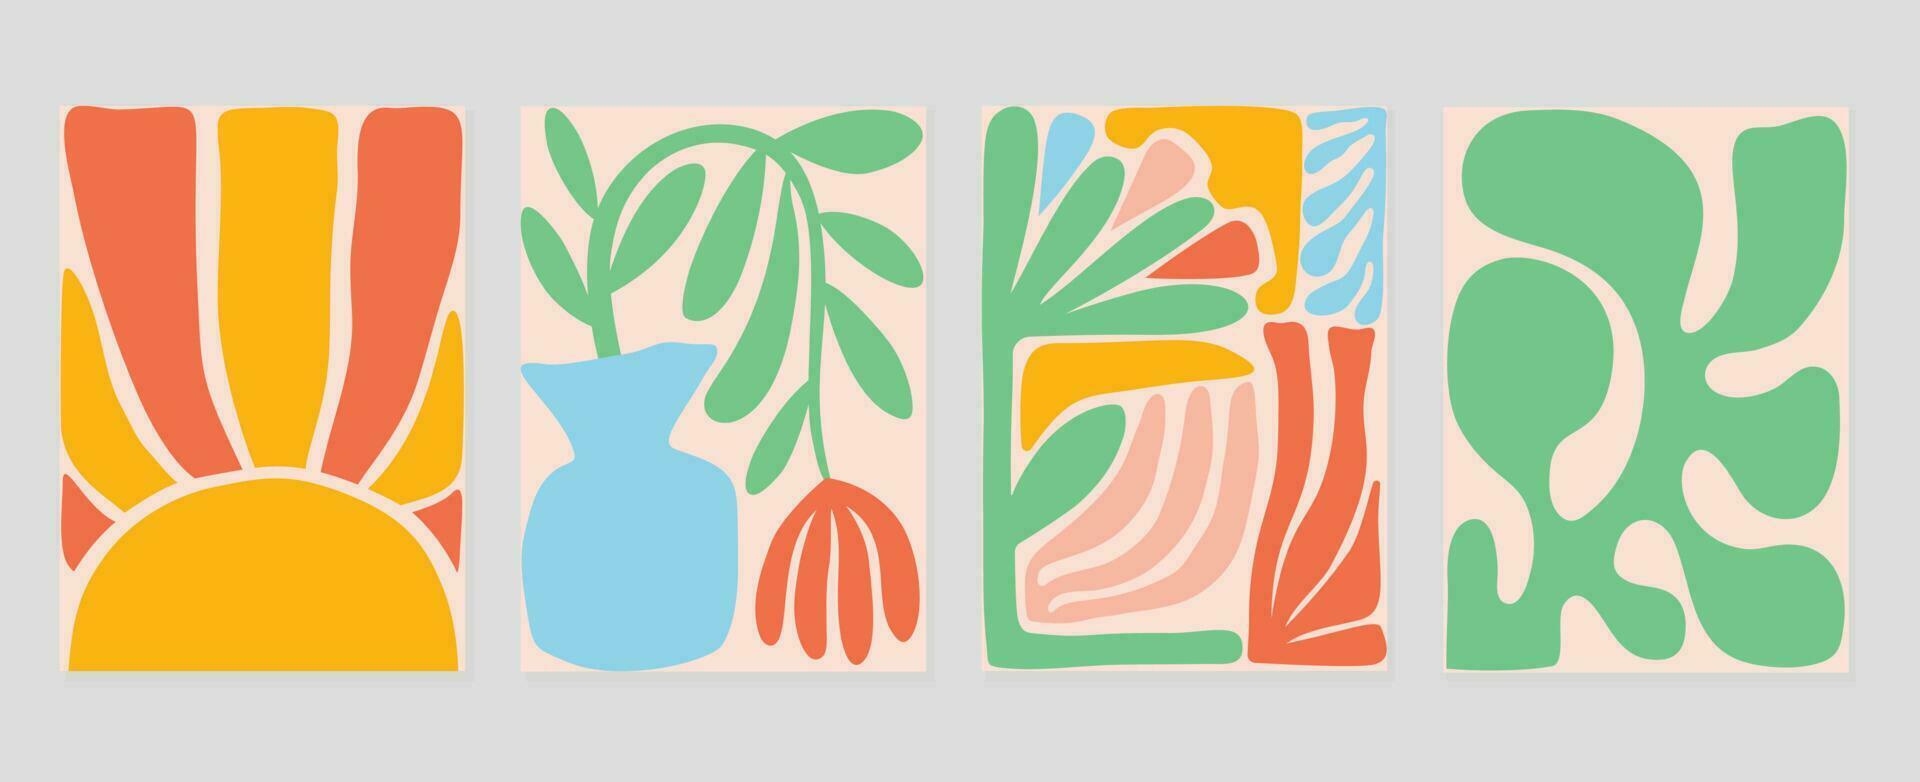 Set of abstract cover background inspired by matisse. Plants, leaf branch, coral, flower, vase in hand drawn style. Contemporary aesthetic illustrated design for wall art, decoration, wallpaper. vector